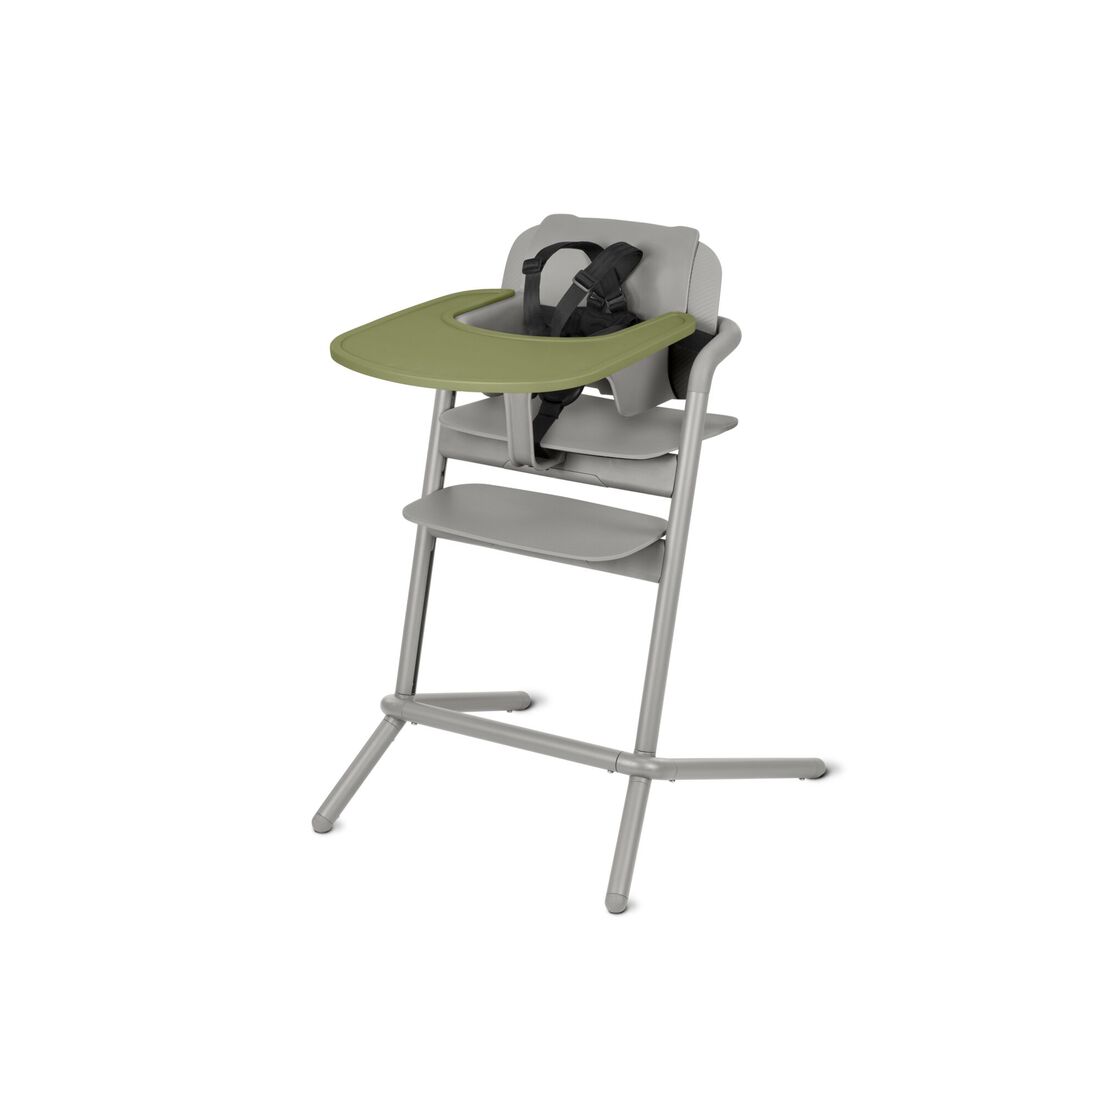 CYBEX Lemo Tray - Outback Green in Outback Green large numero immagine 1